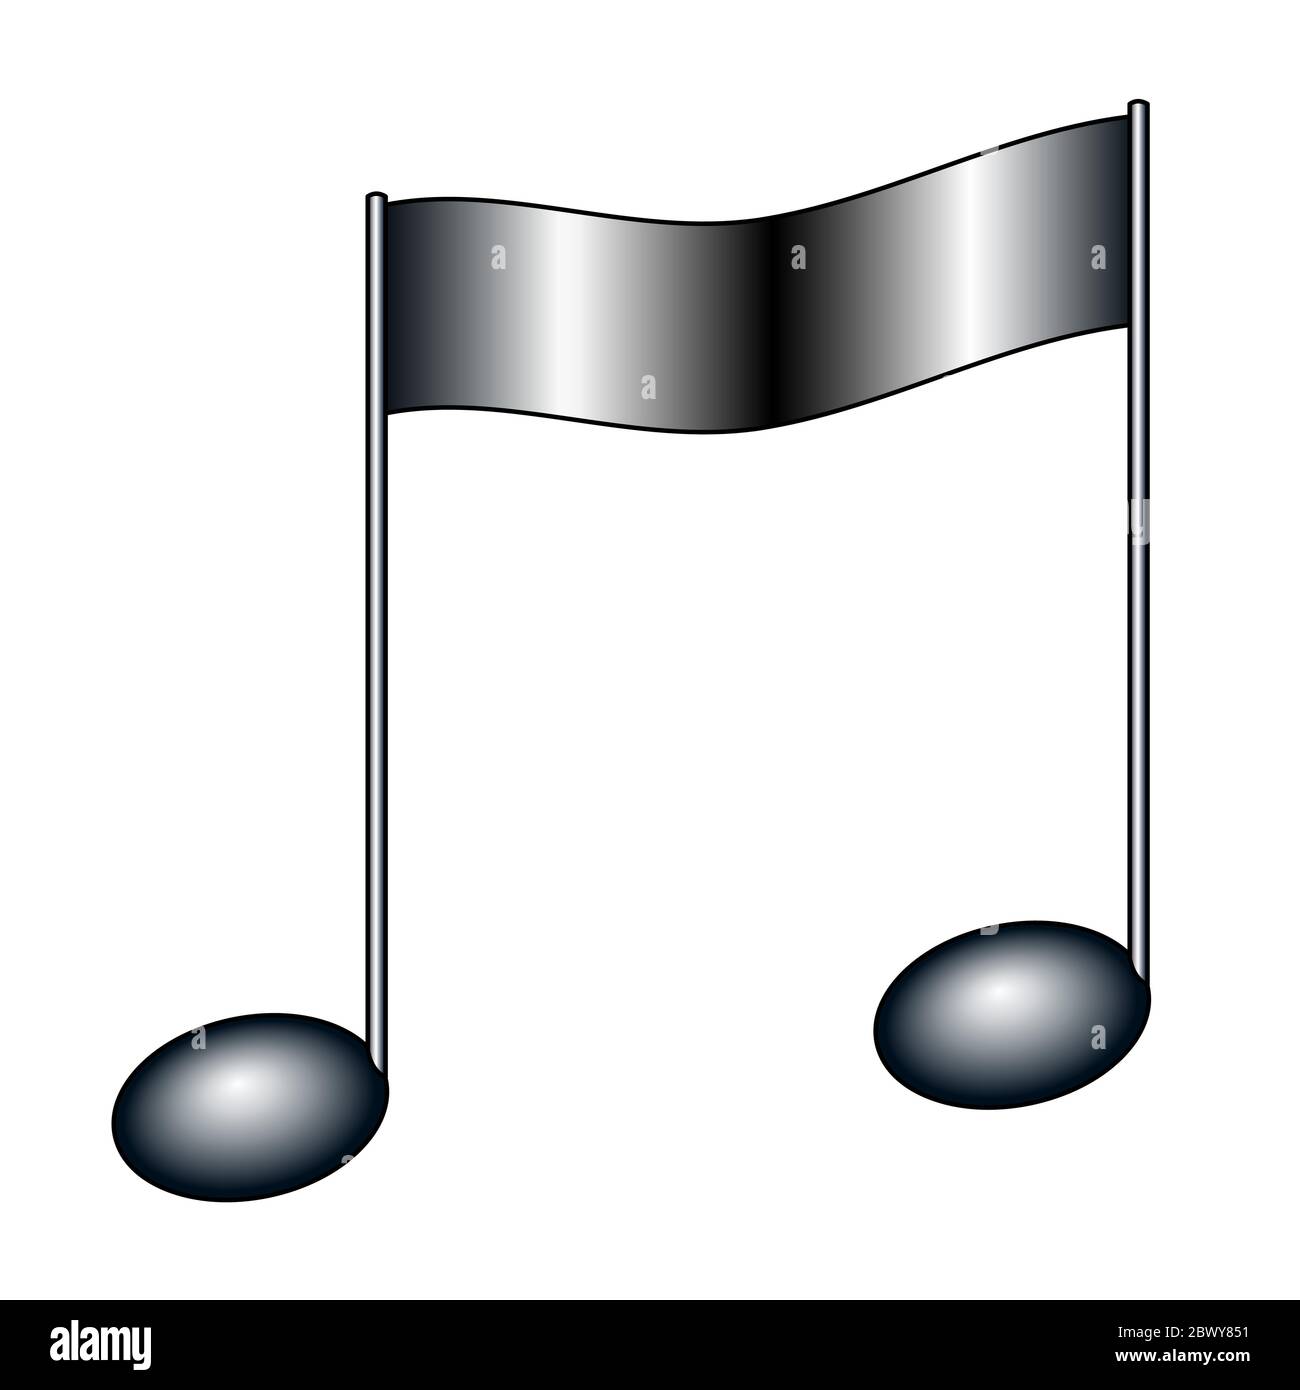 Illustration of the musical beamed note symbol Stock Vector